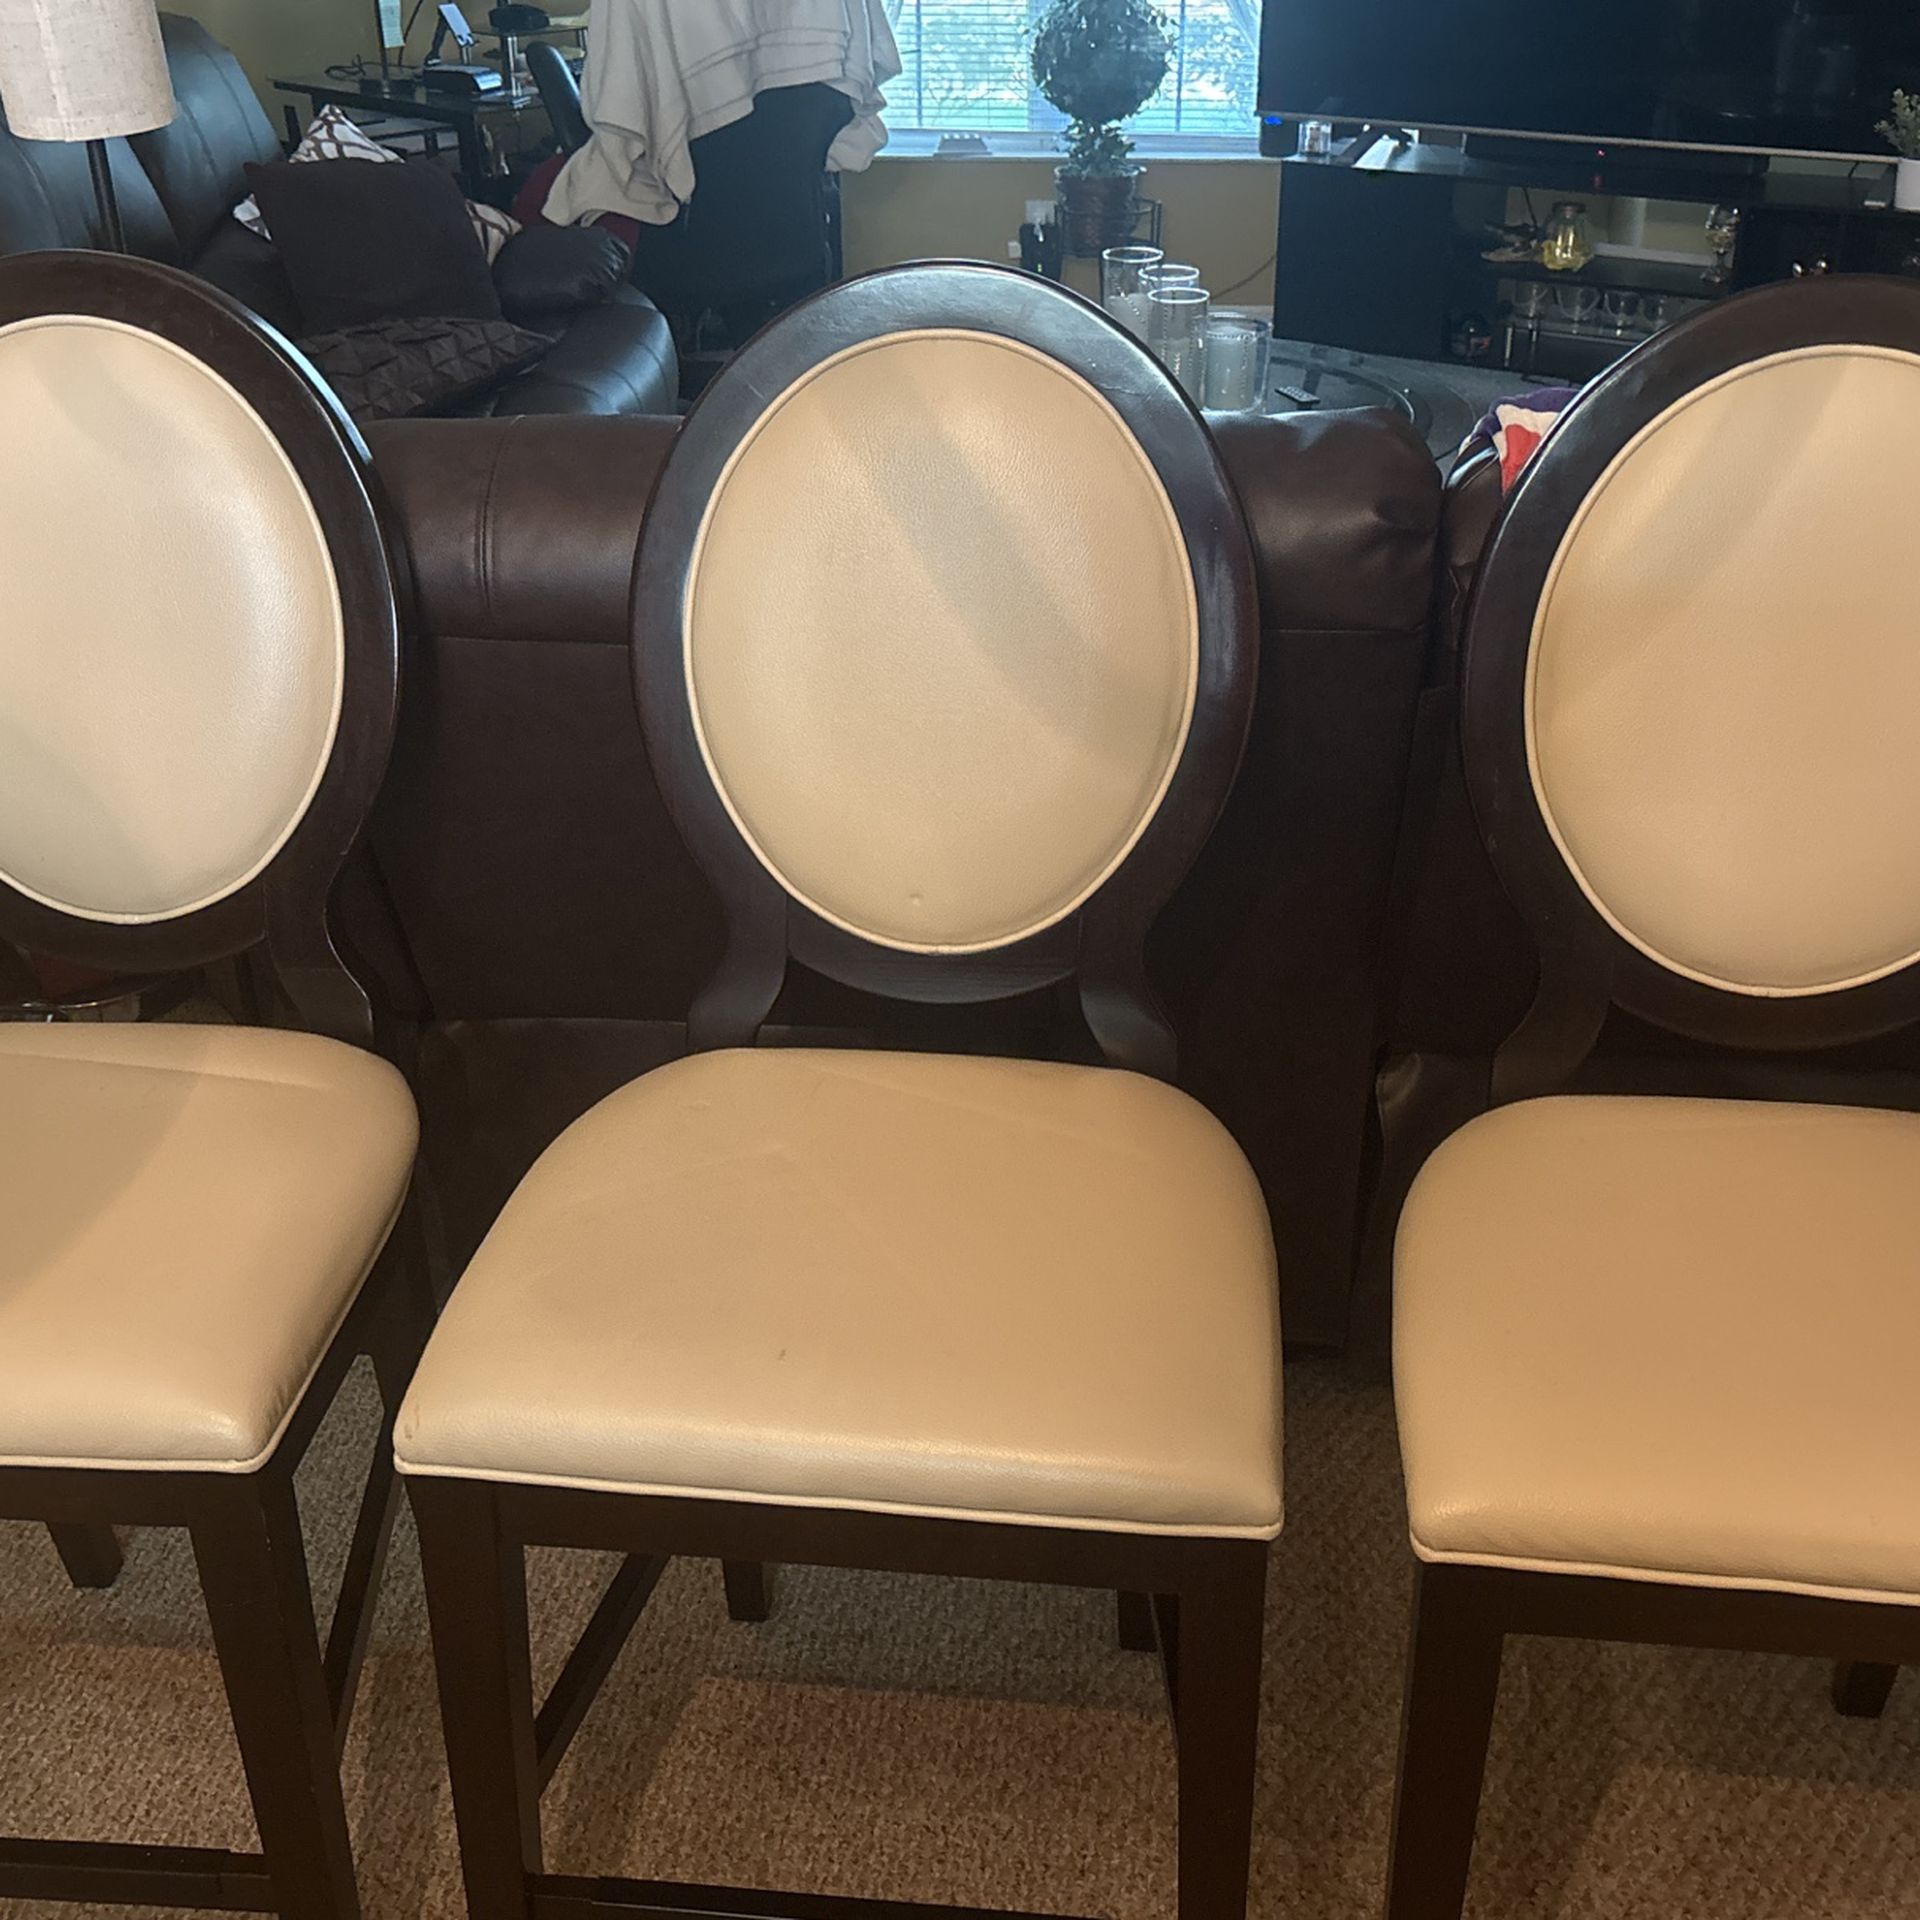 $30 Each Dinning Room High Chairs